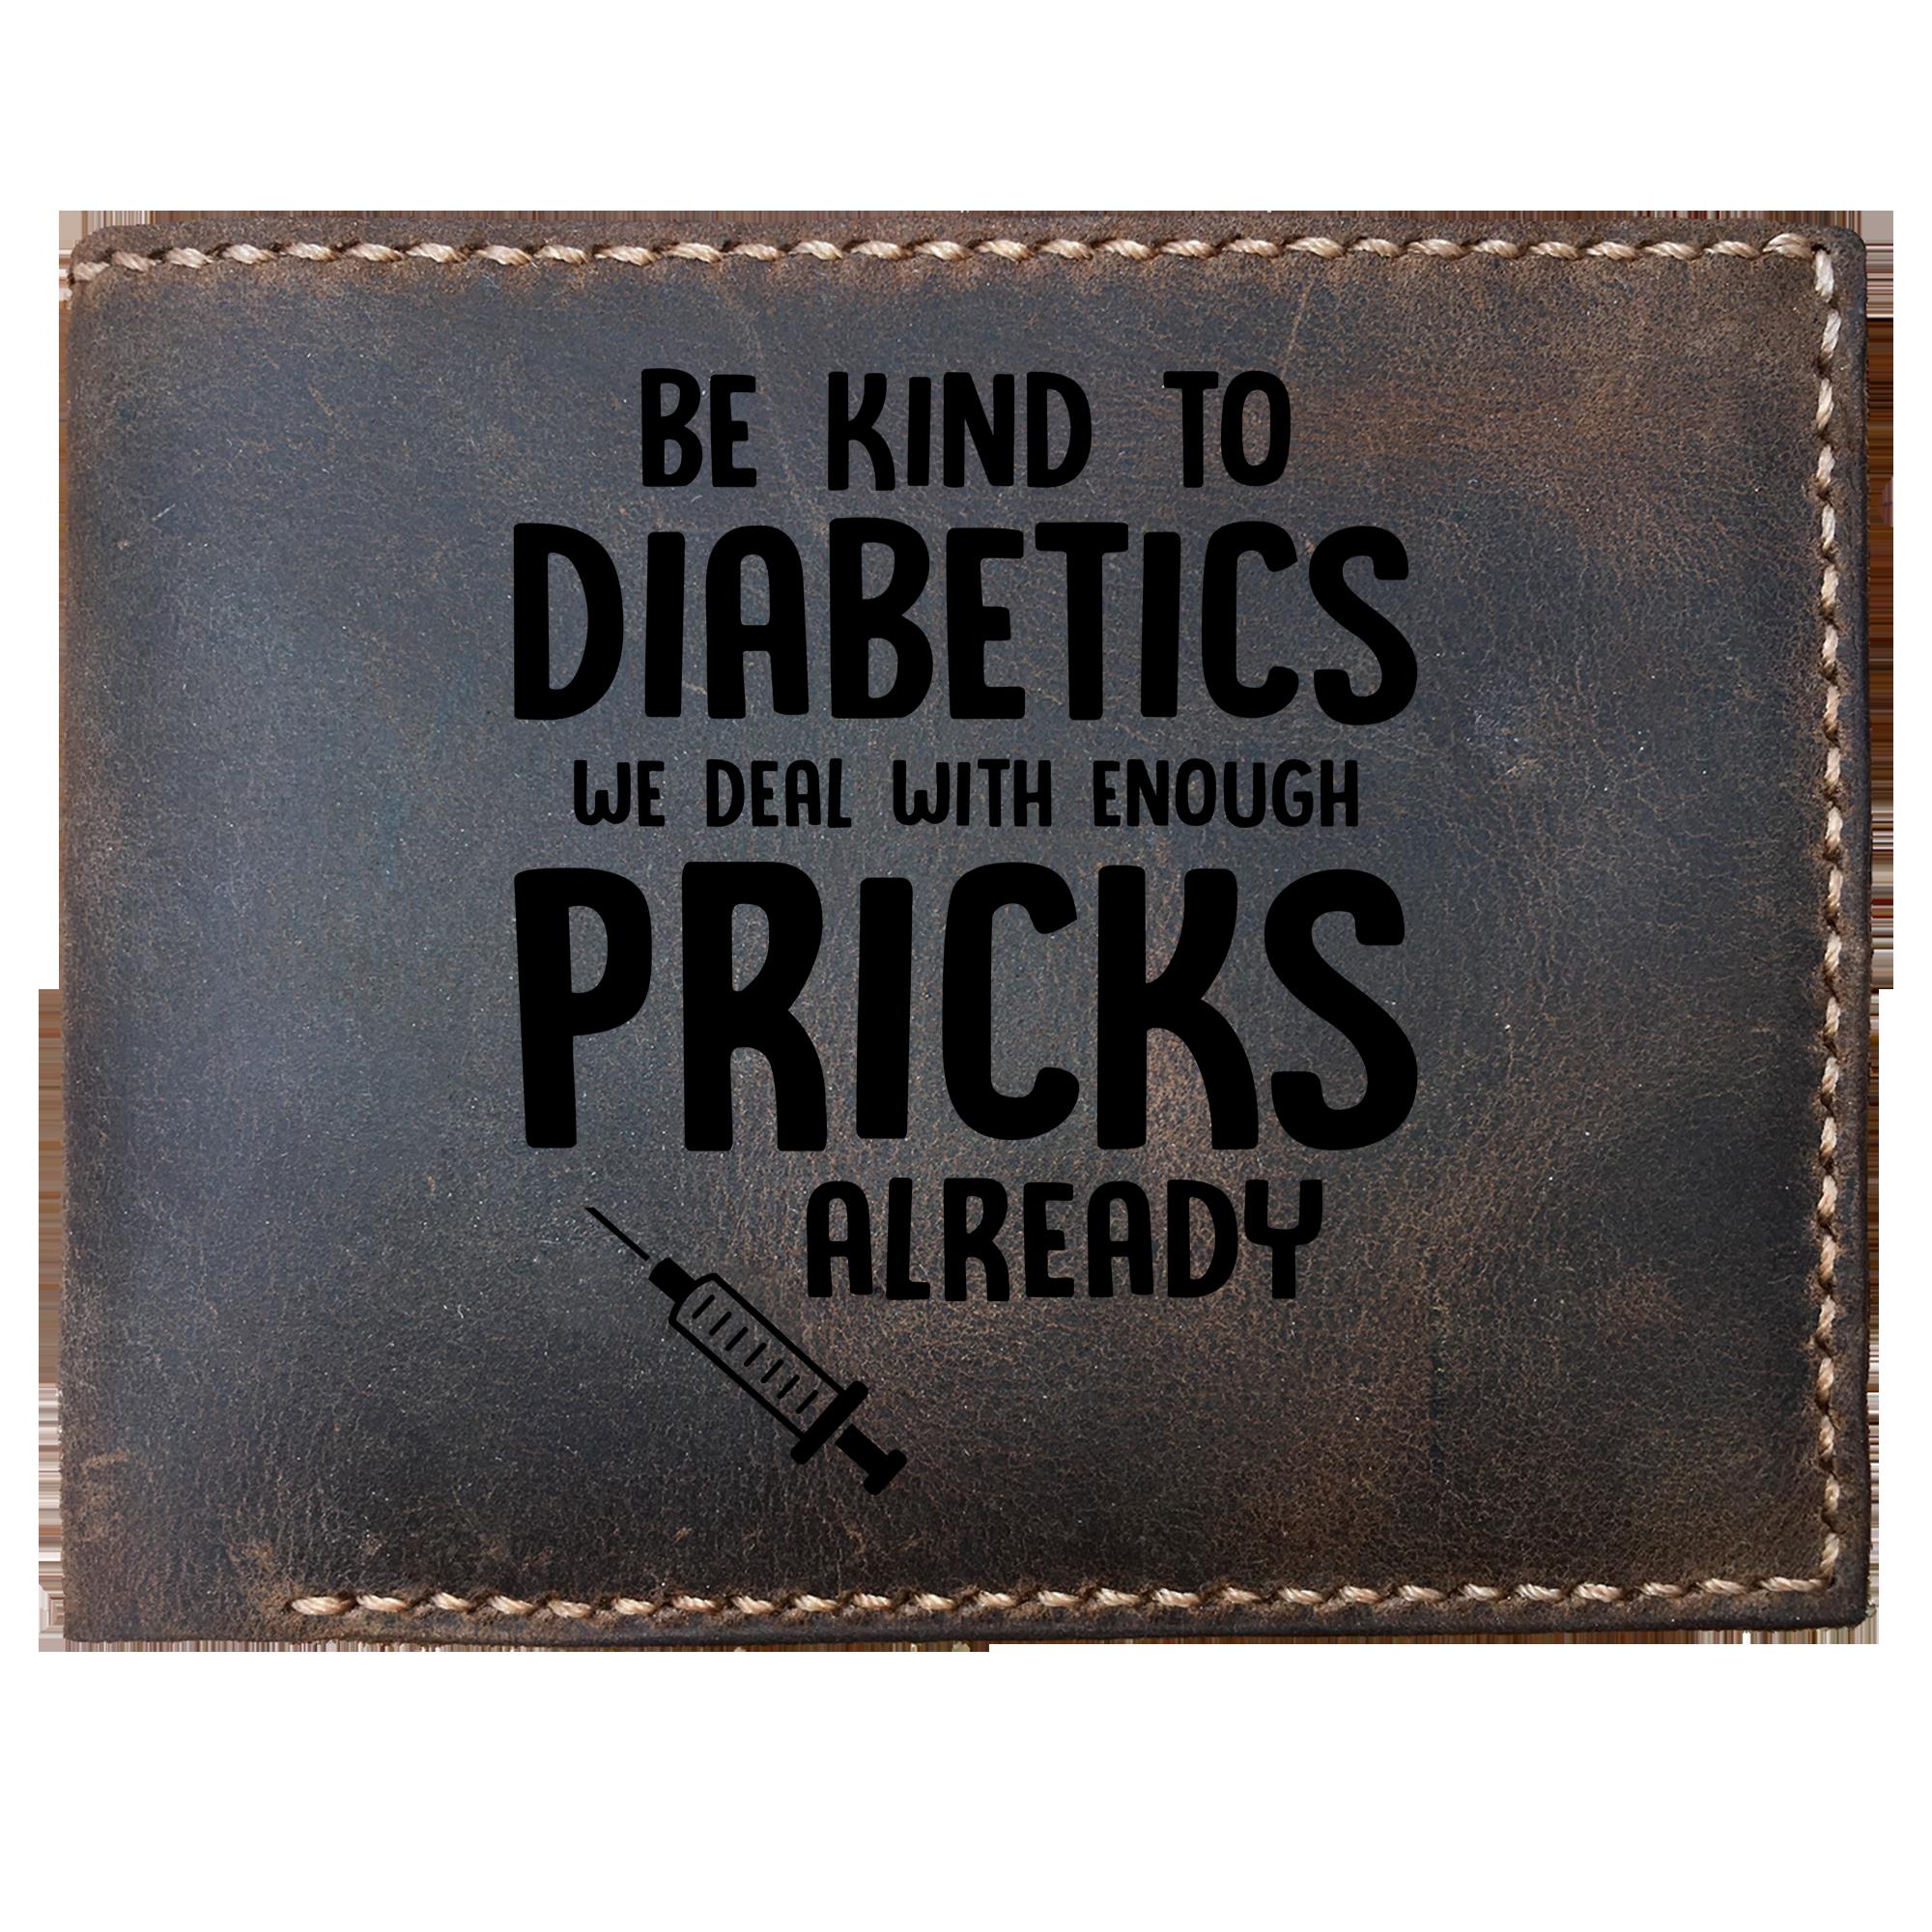 Skitongifts Funny Custom Laser Engraved Bifold Leather Wallet For Men, Be Kind To Diabetics We Deal With Enough Pricks Already